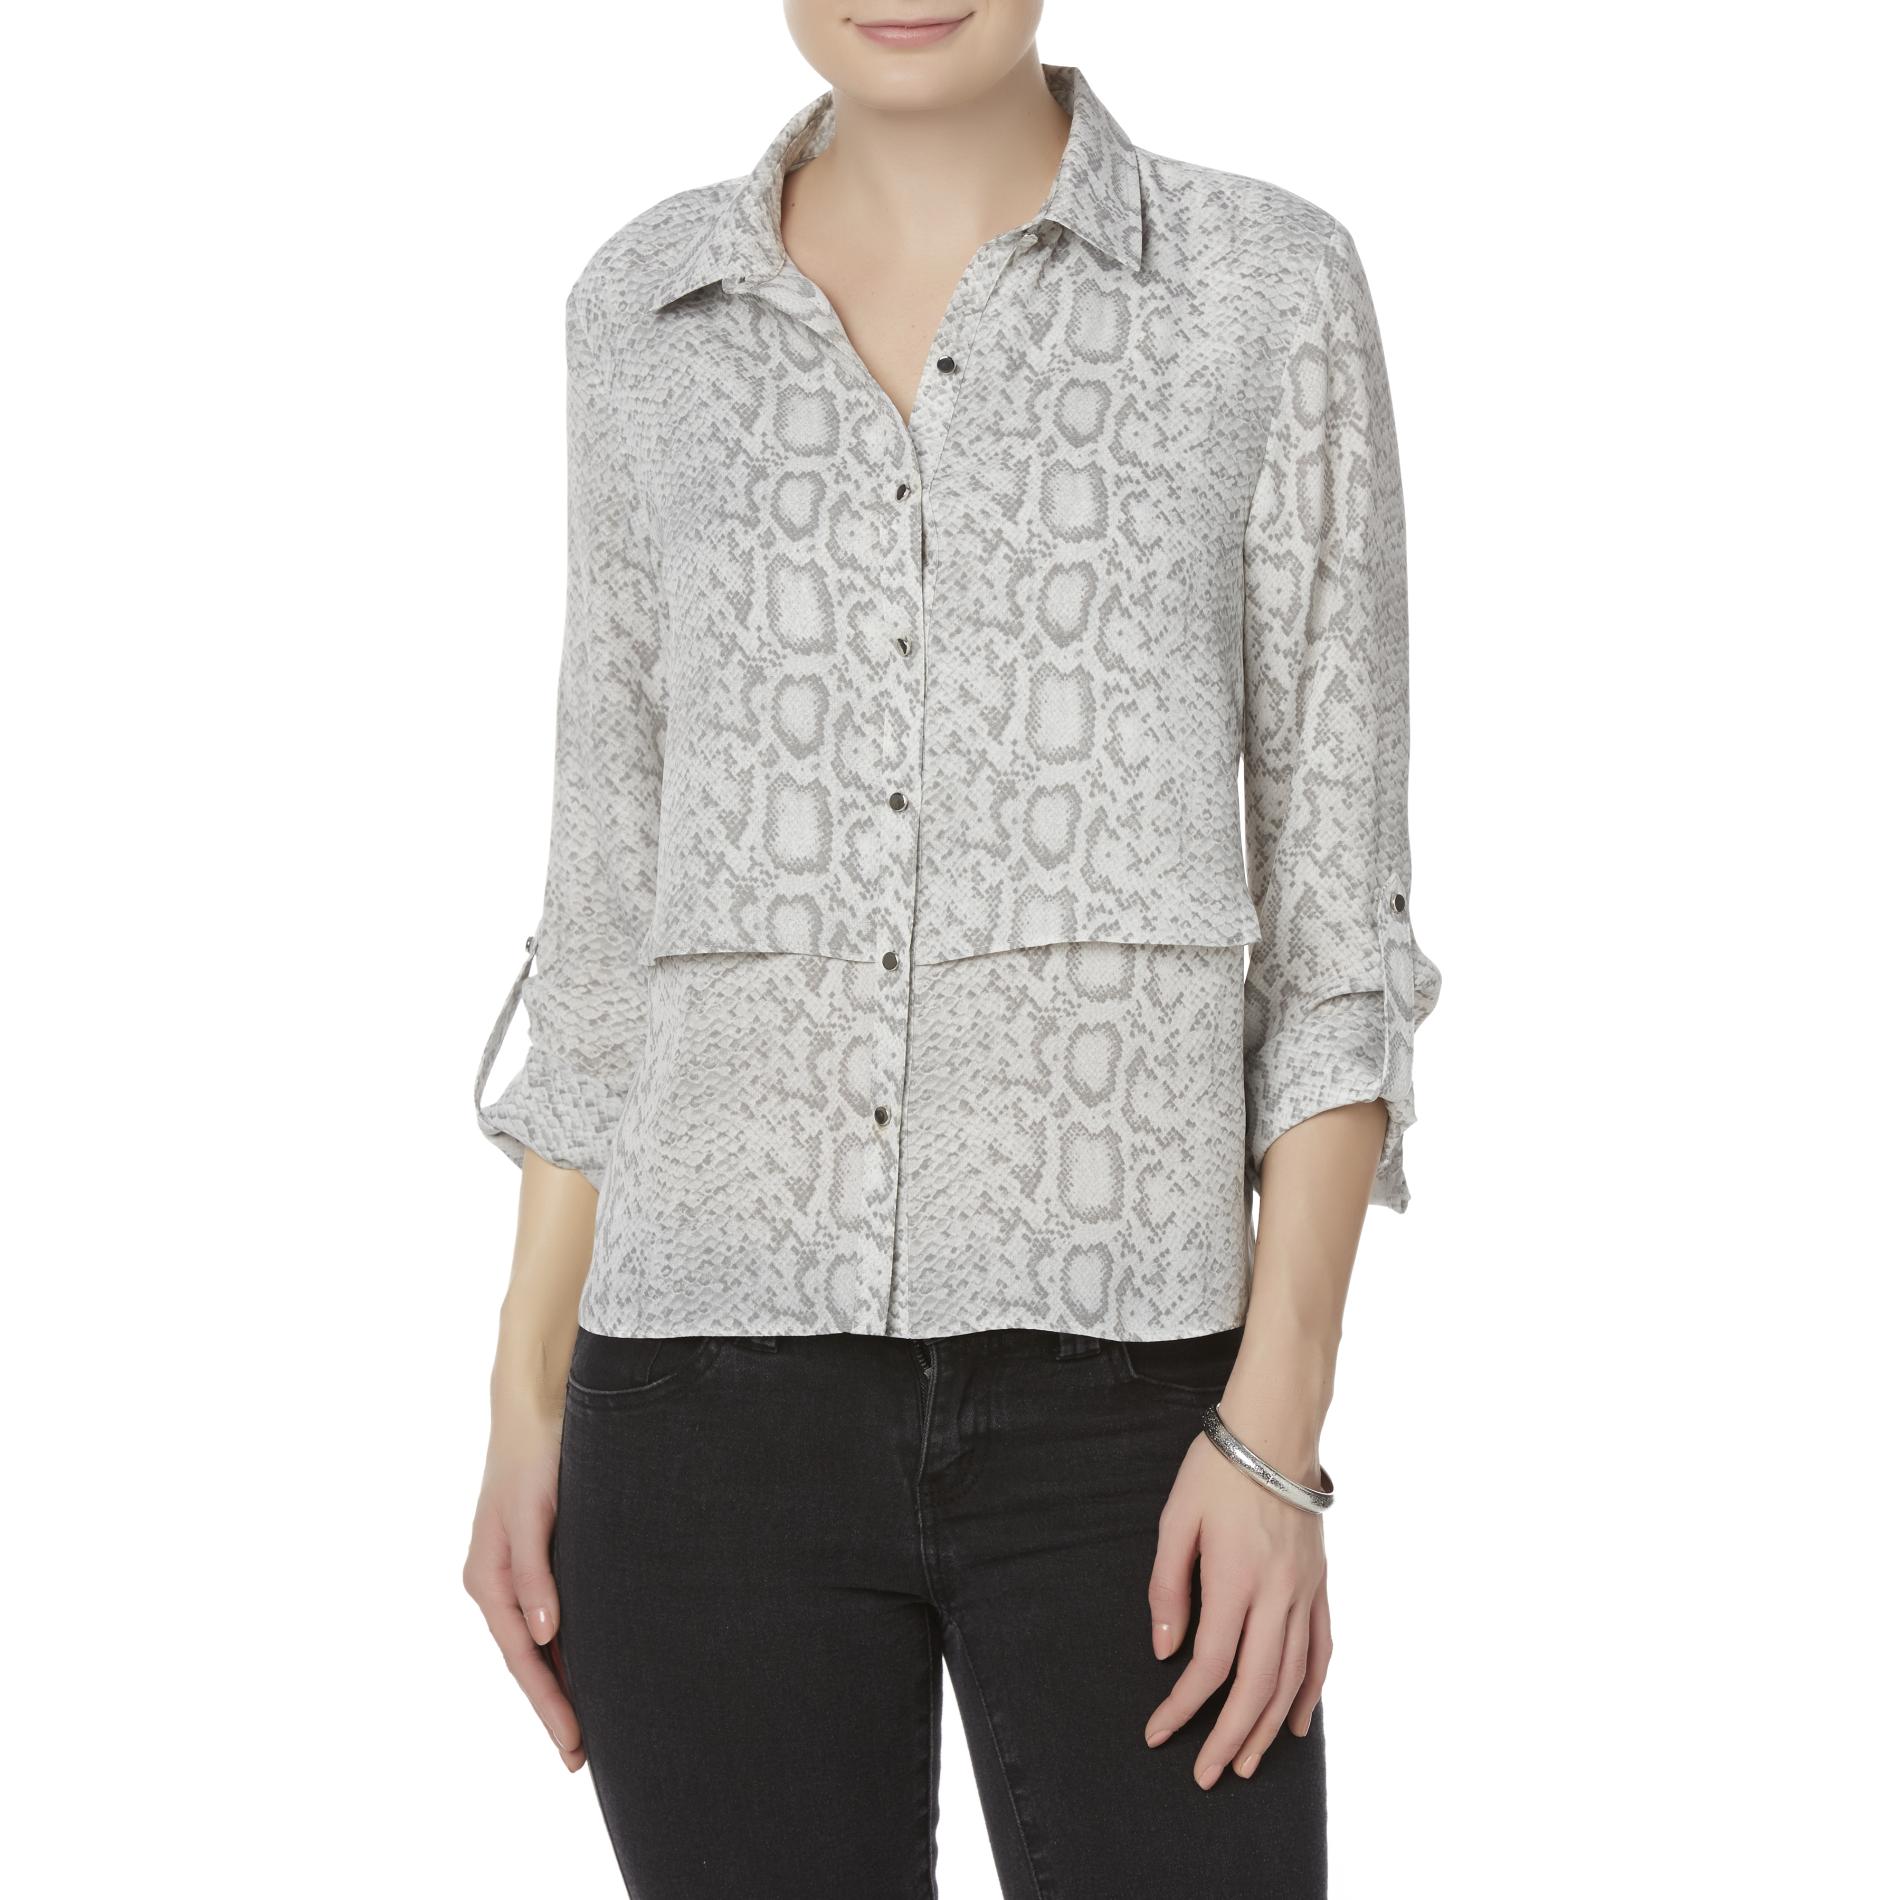 Simply Styled Women's Tiered Blouse - Snakeskin Printx